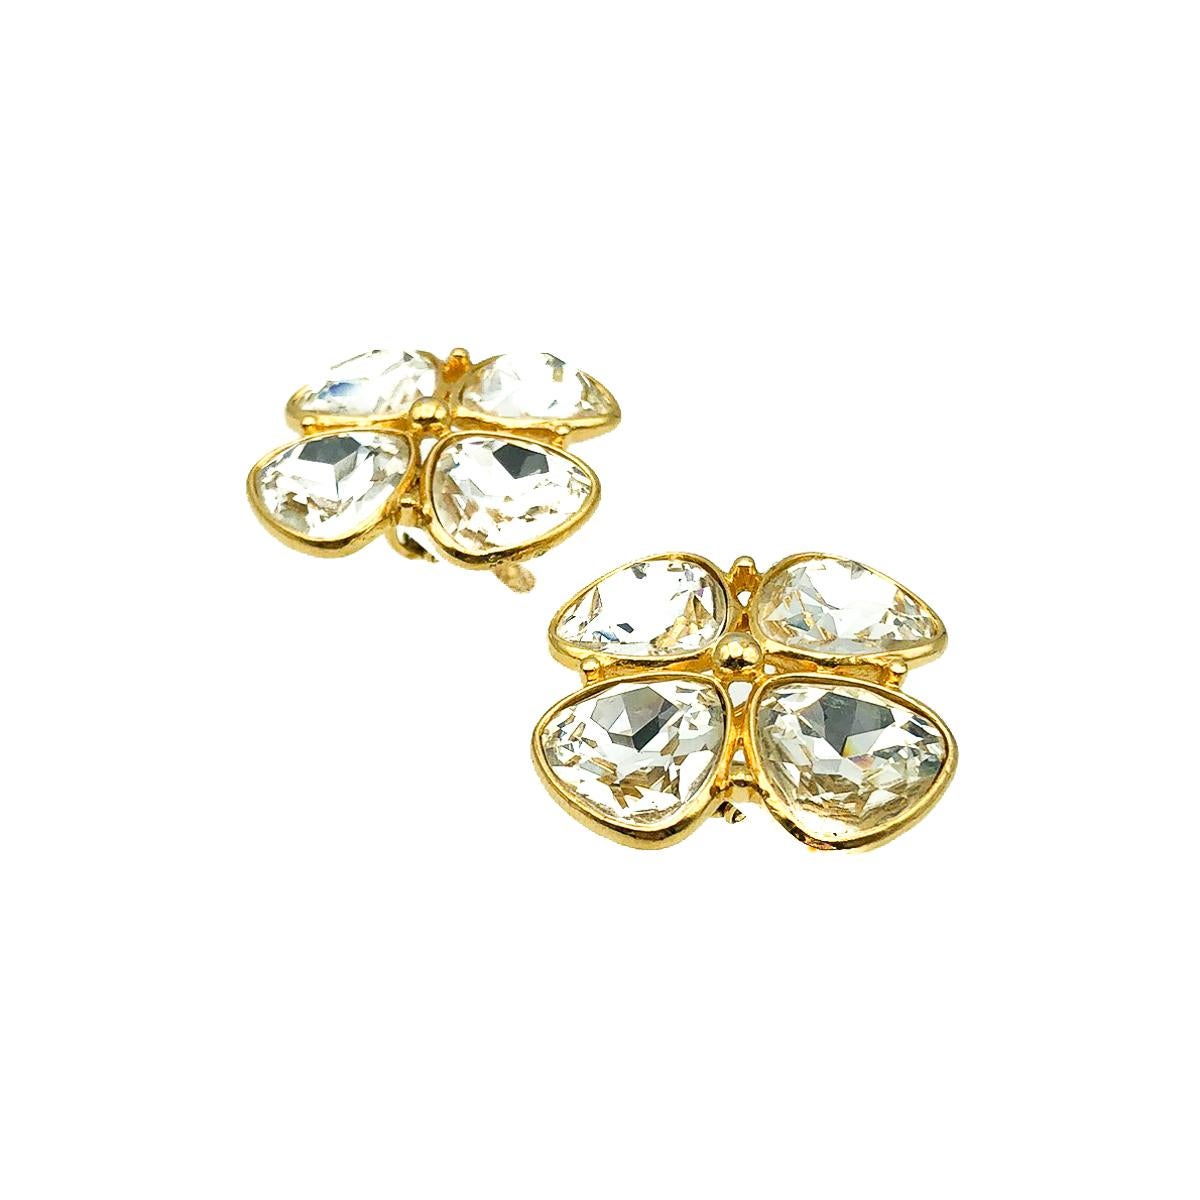 Our Vintage Napier quatre earrings. Featuring four fabulous fancy cut crystals on each ear for a neat yet maximum sparkle. 
Vintage Condition: Very good without damage or noteworthy wear. 
Materials: Gold plated metal, crystal
Signed: